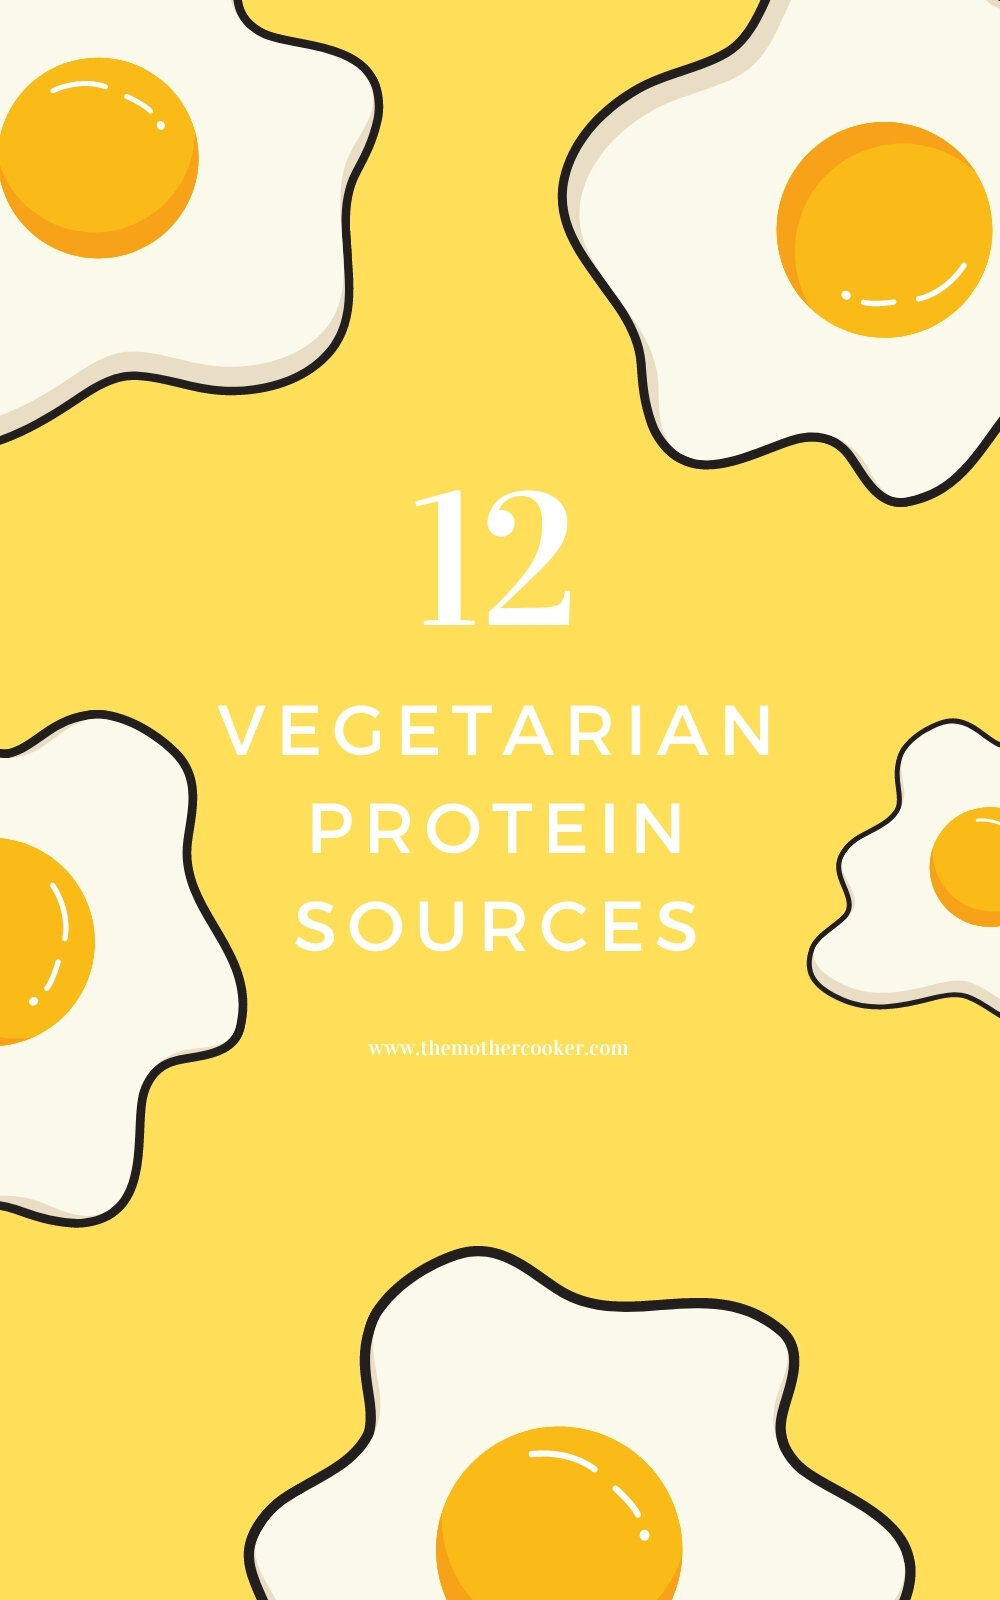 12 Vegetarian Protein Sources | The Mother Cooker